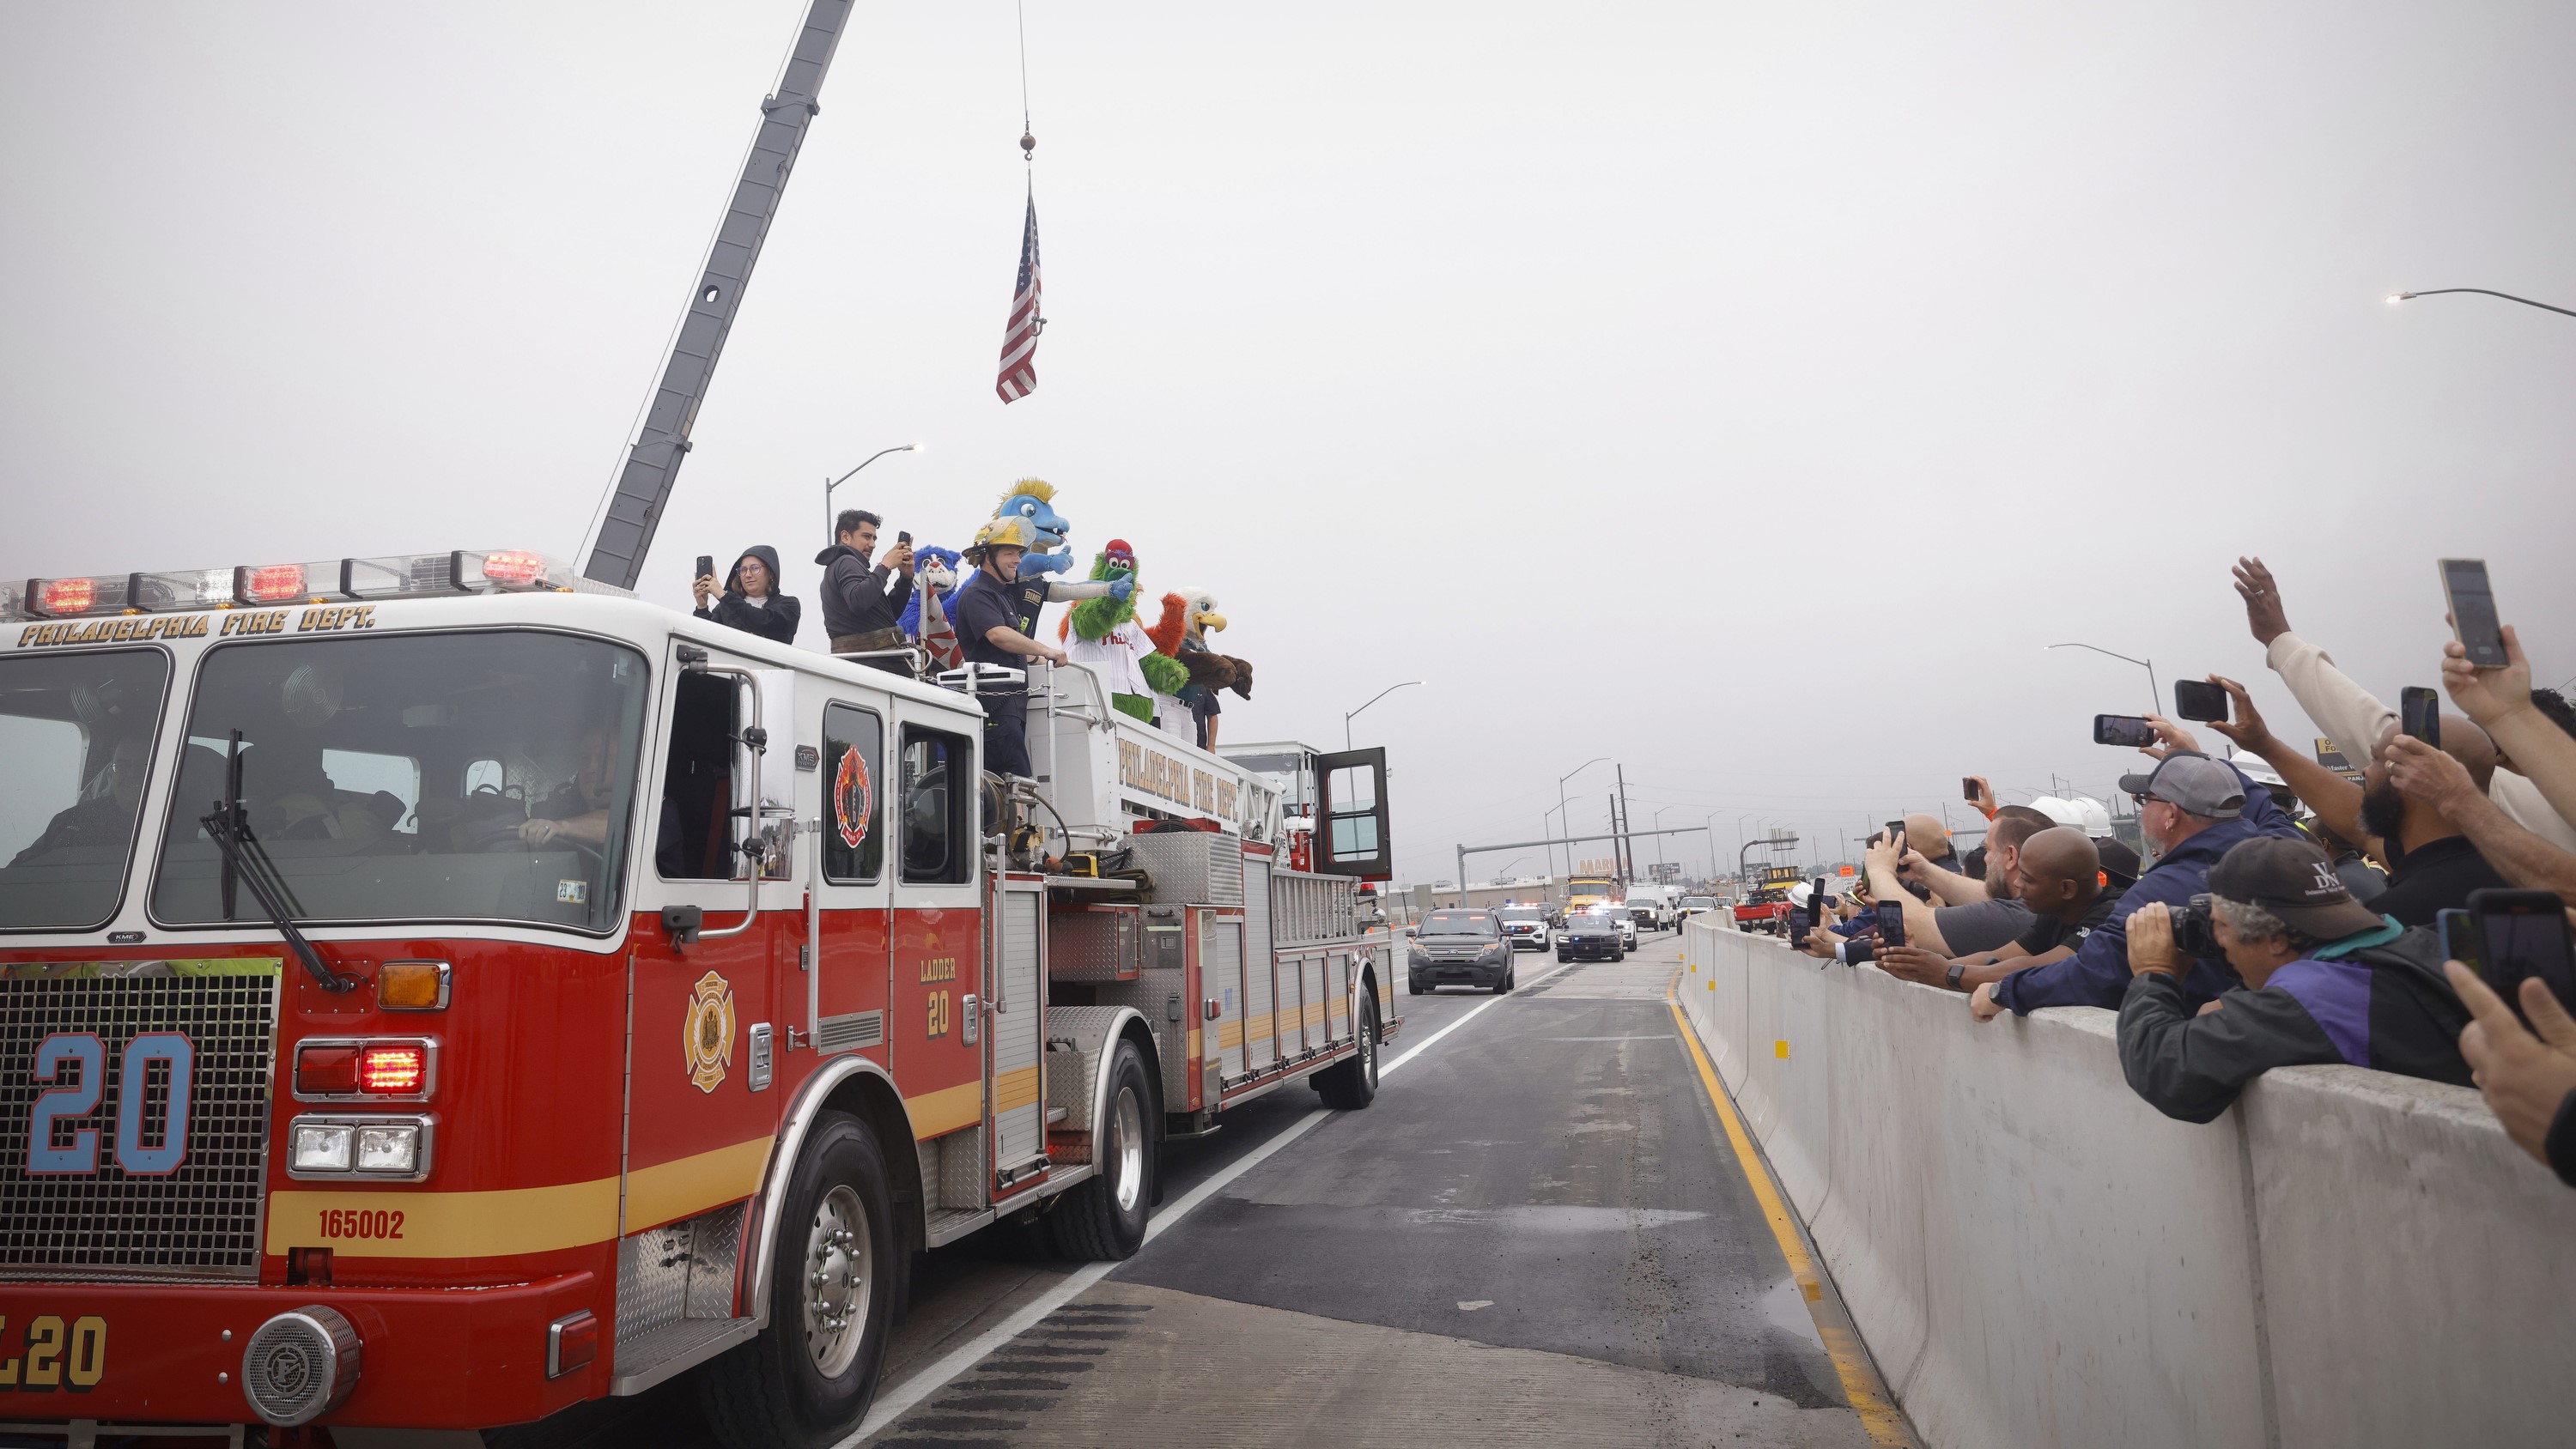 A fire truck and other vehicles drive over the temporary I-95 overpass on opening day while individuals standing behind concrete barriers take photos and wave; atop the fire truck stand firefighters as well as the Philly Philadelphia Phillies Phantic mascot and the Philadelphia Eagles mascot.